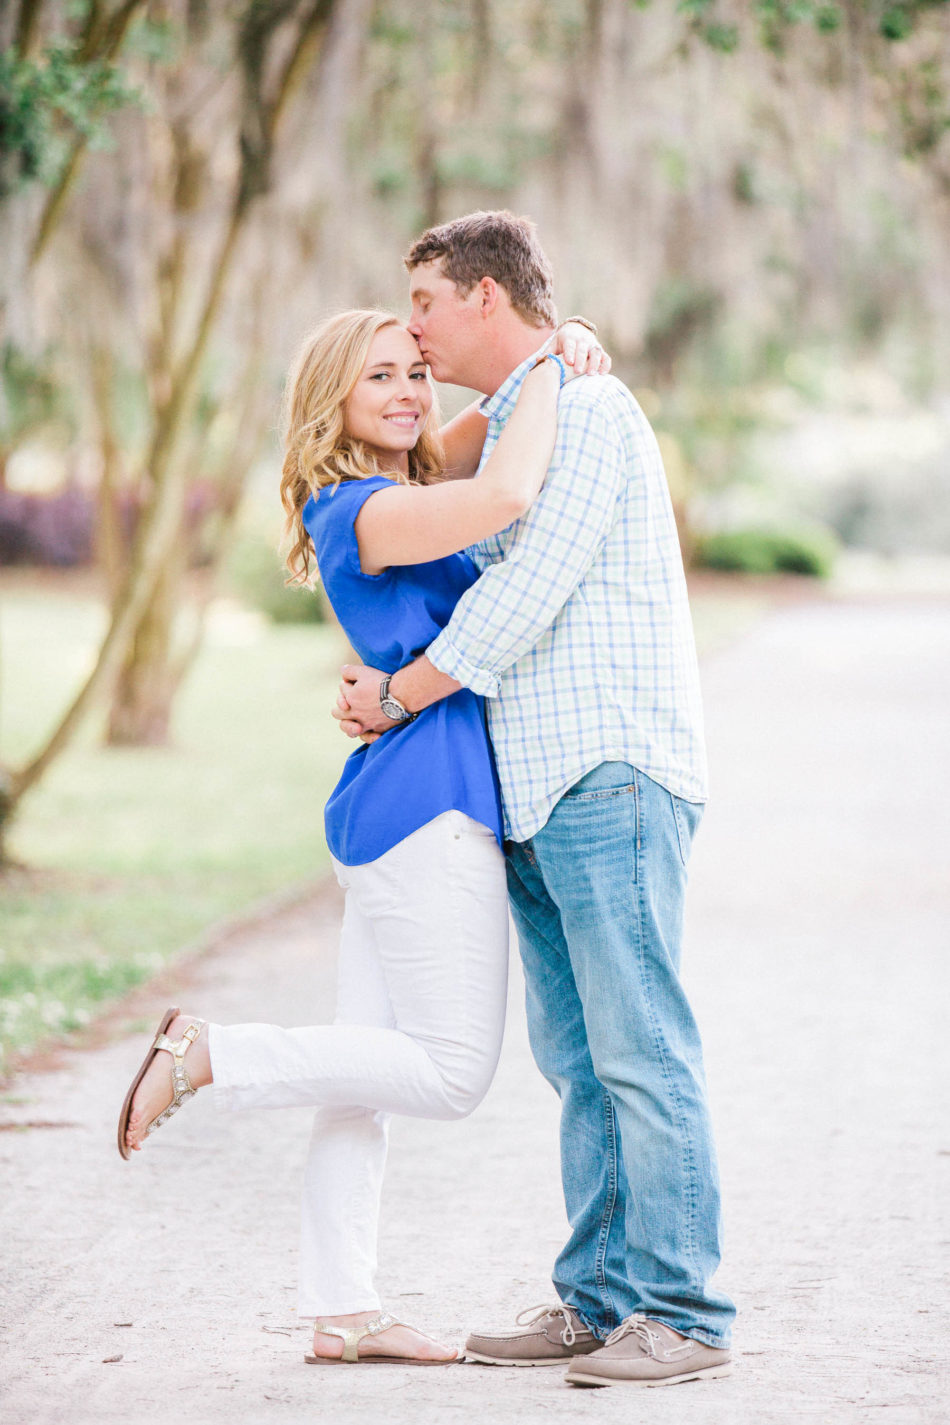 Engaged couple stand in pathway full of trees and spanish moss, Hampton Park, Charleston, South Carolina Kate Timbers Photography. http://katetimbers.com #katetimbersphotography // Charleston Photography // Inspiration